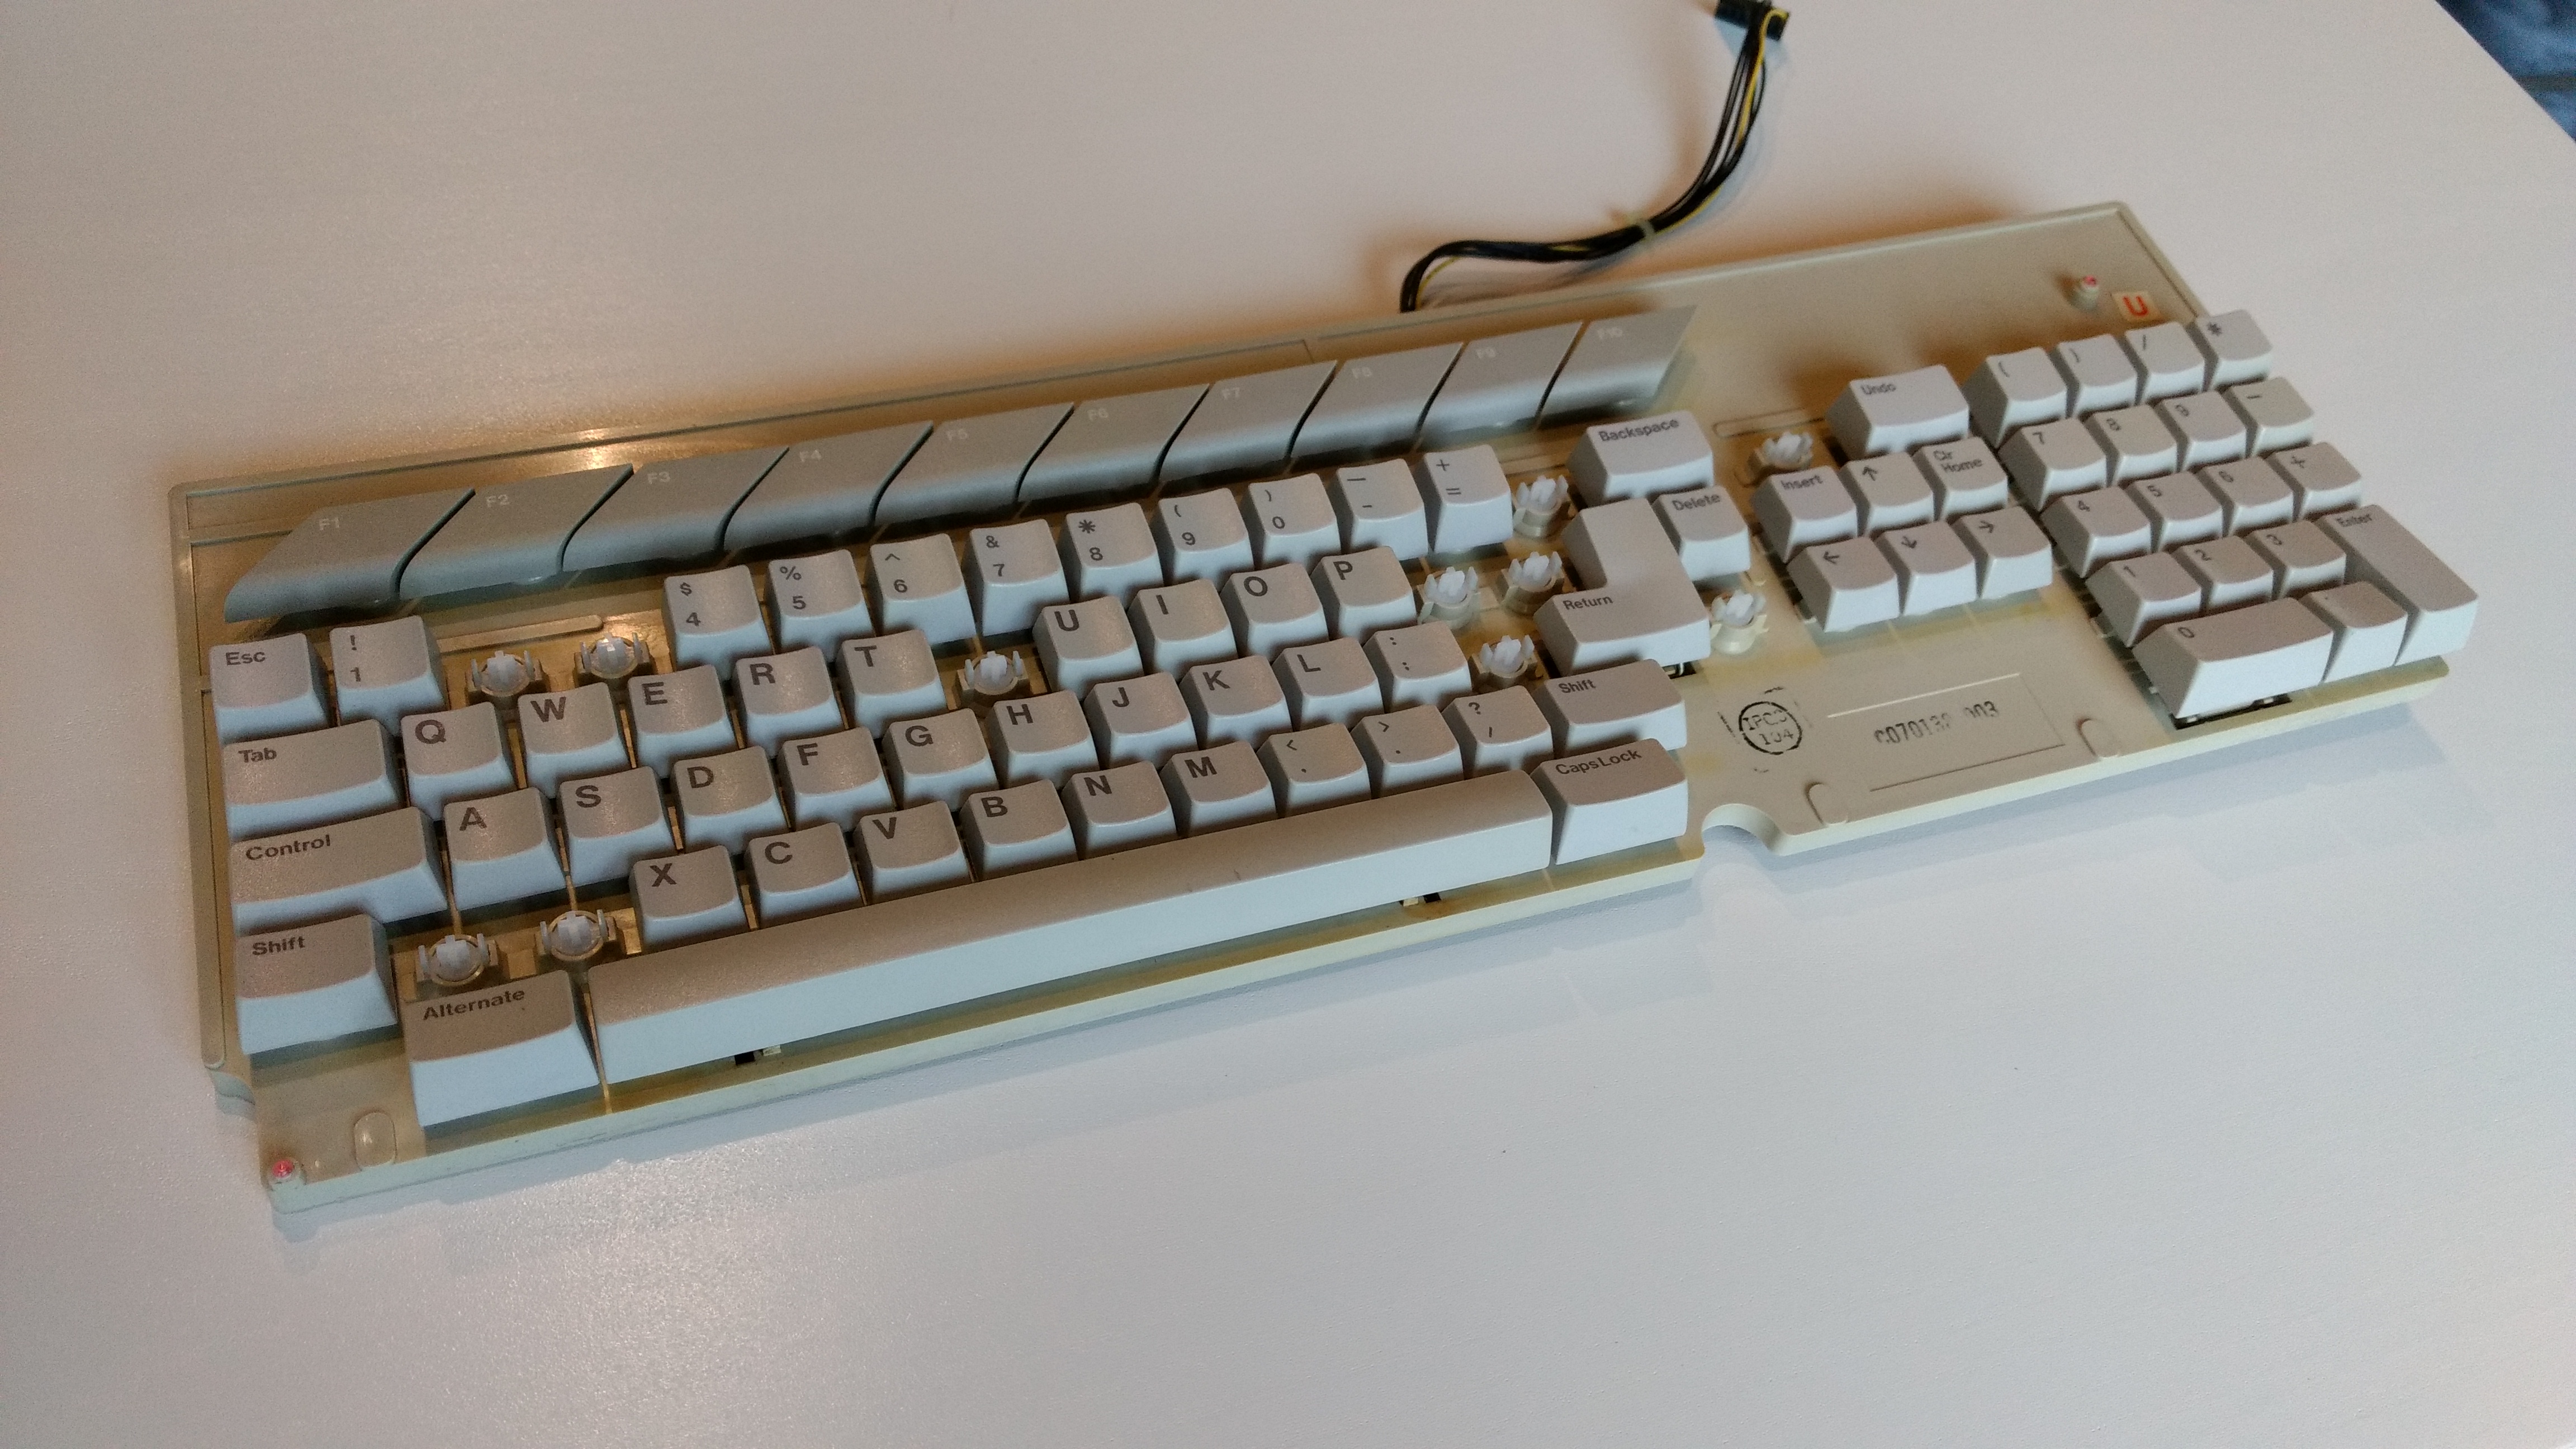  Building the keyboard with these white keys on that clean board, it is so satisfying :-) 